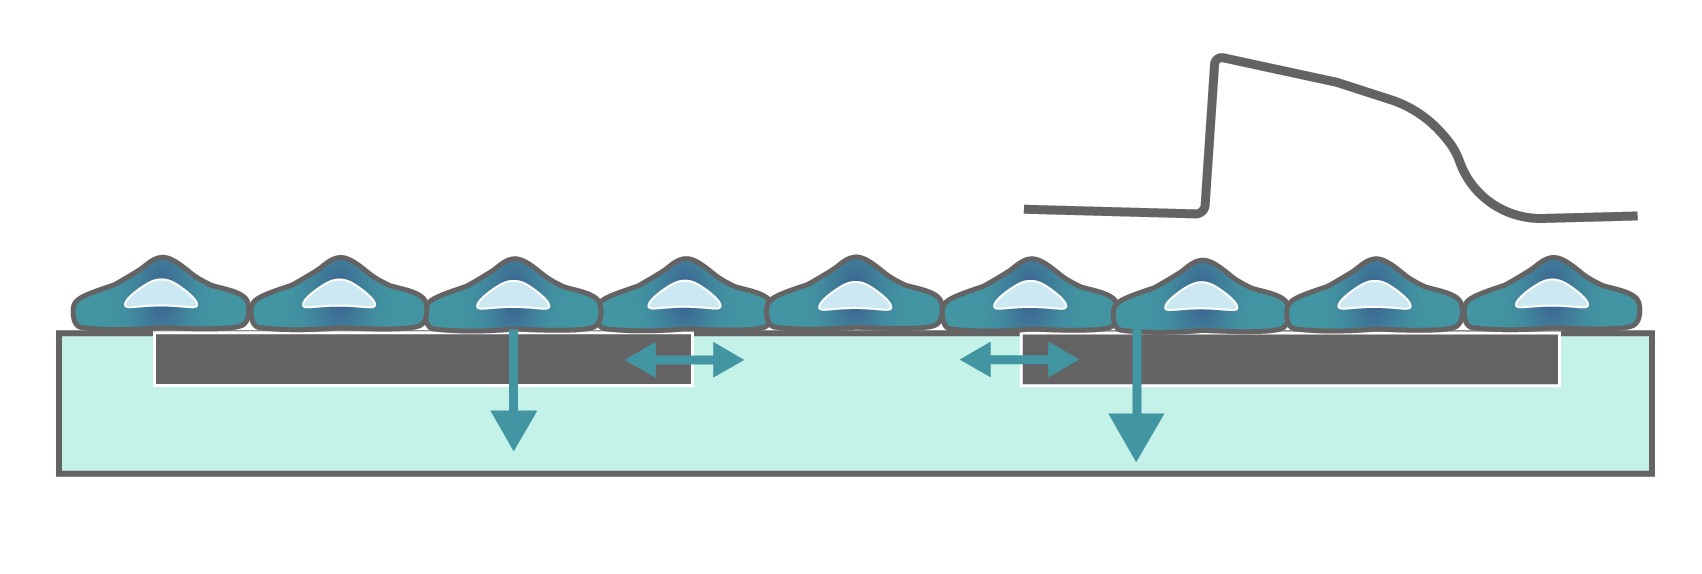 Rendering of cells growing over the electrodes at the bottom of the well